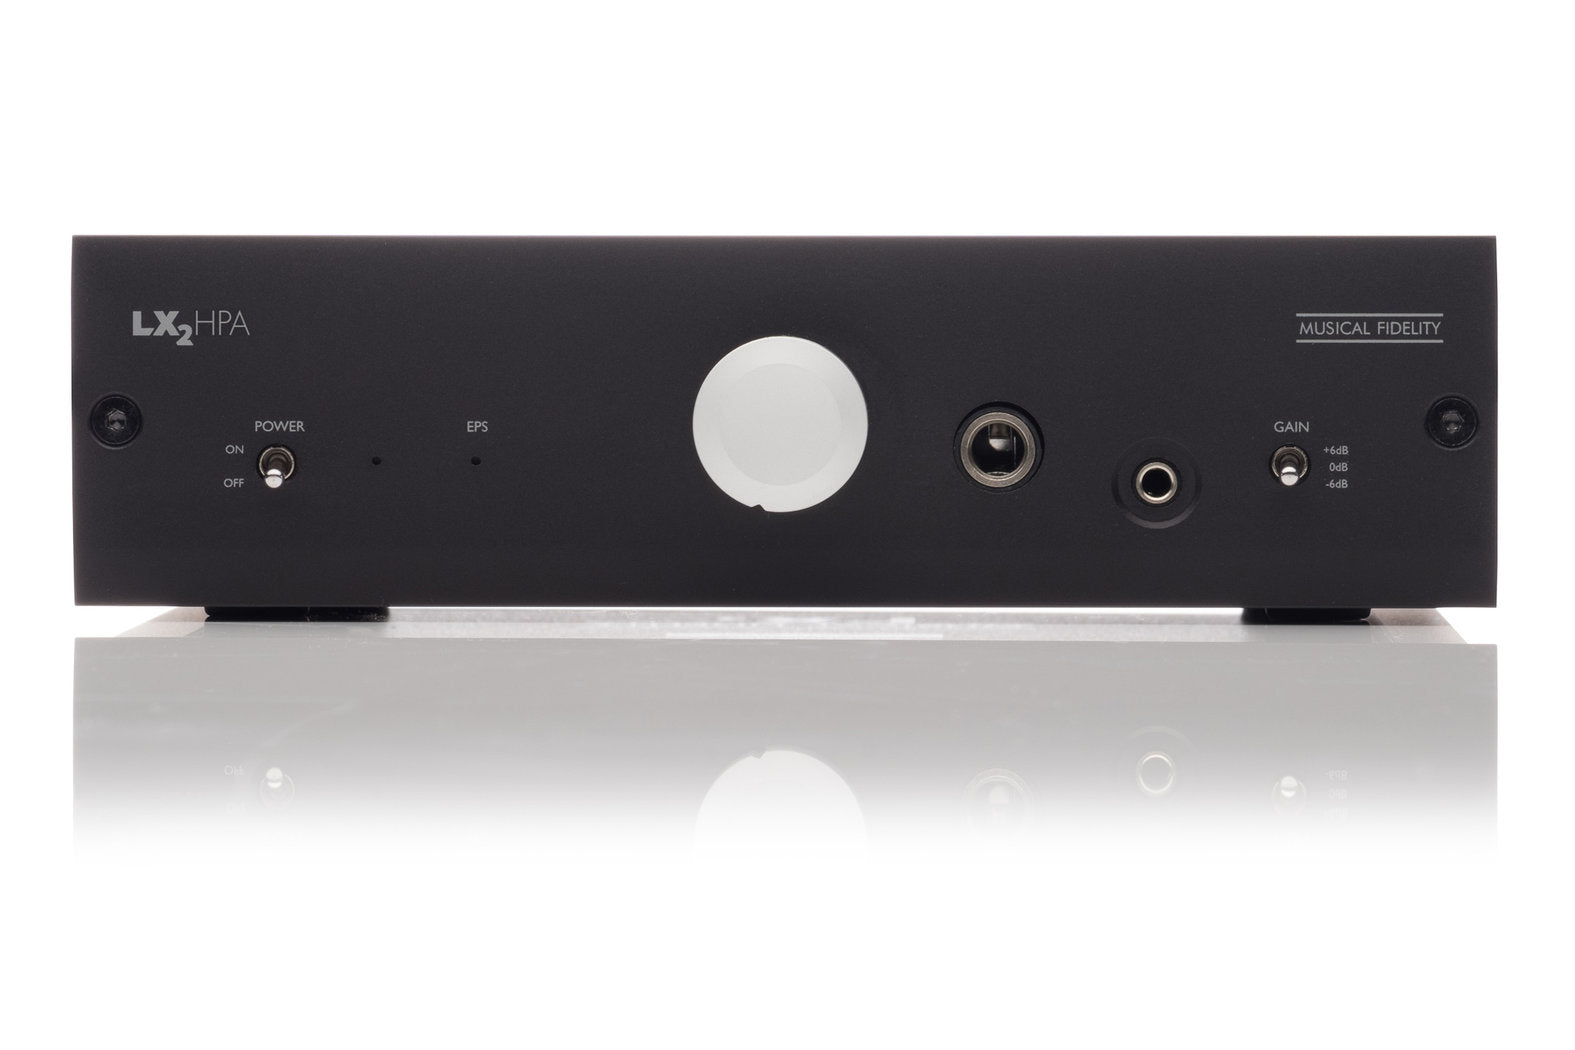 Musical Fidelity LX2-HPA headphone amplifier